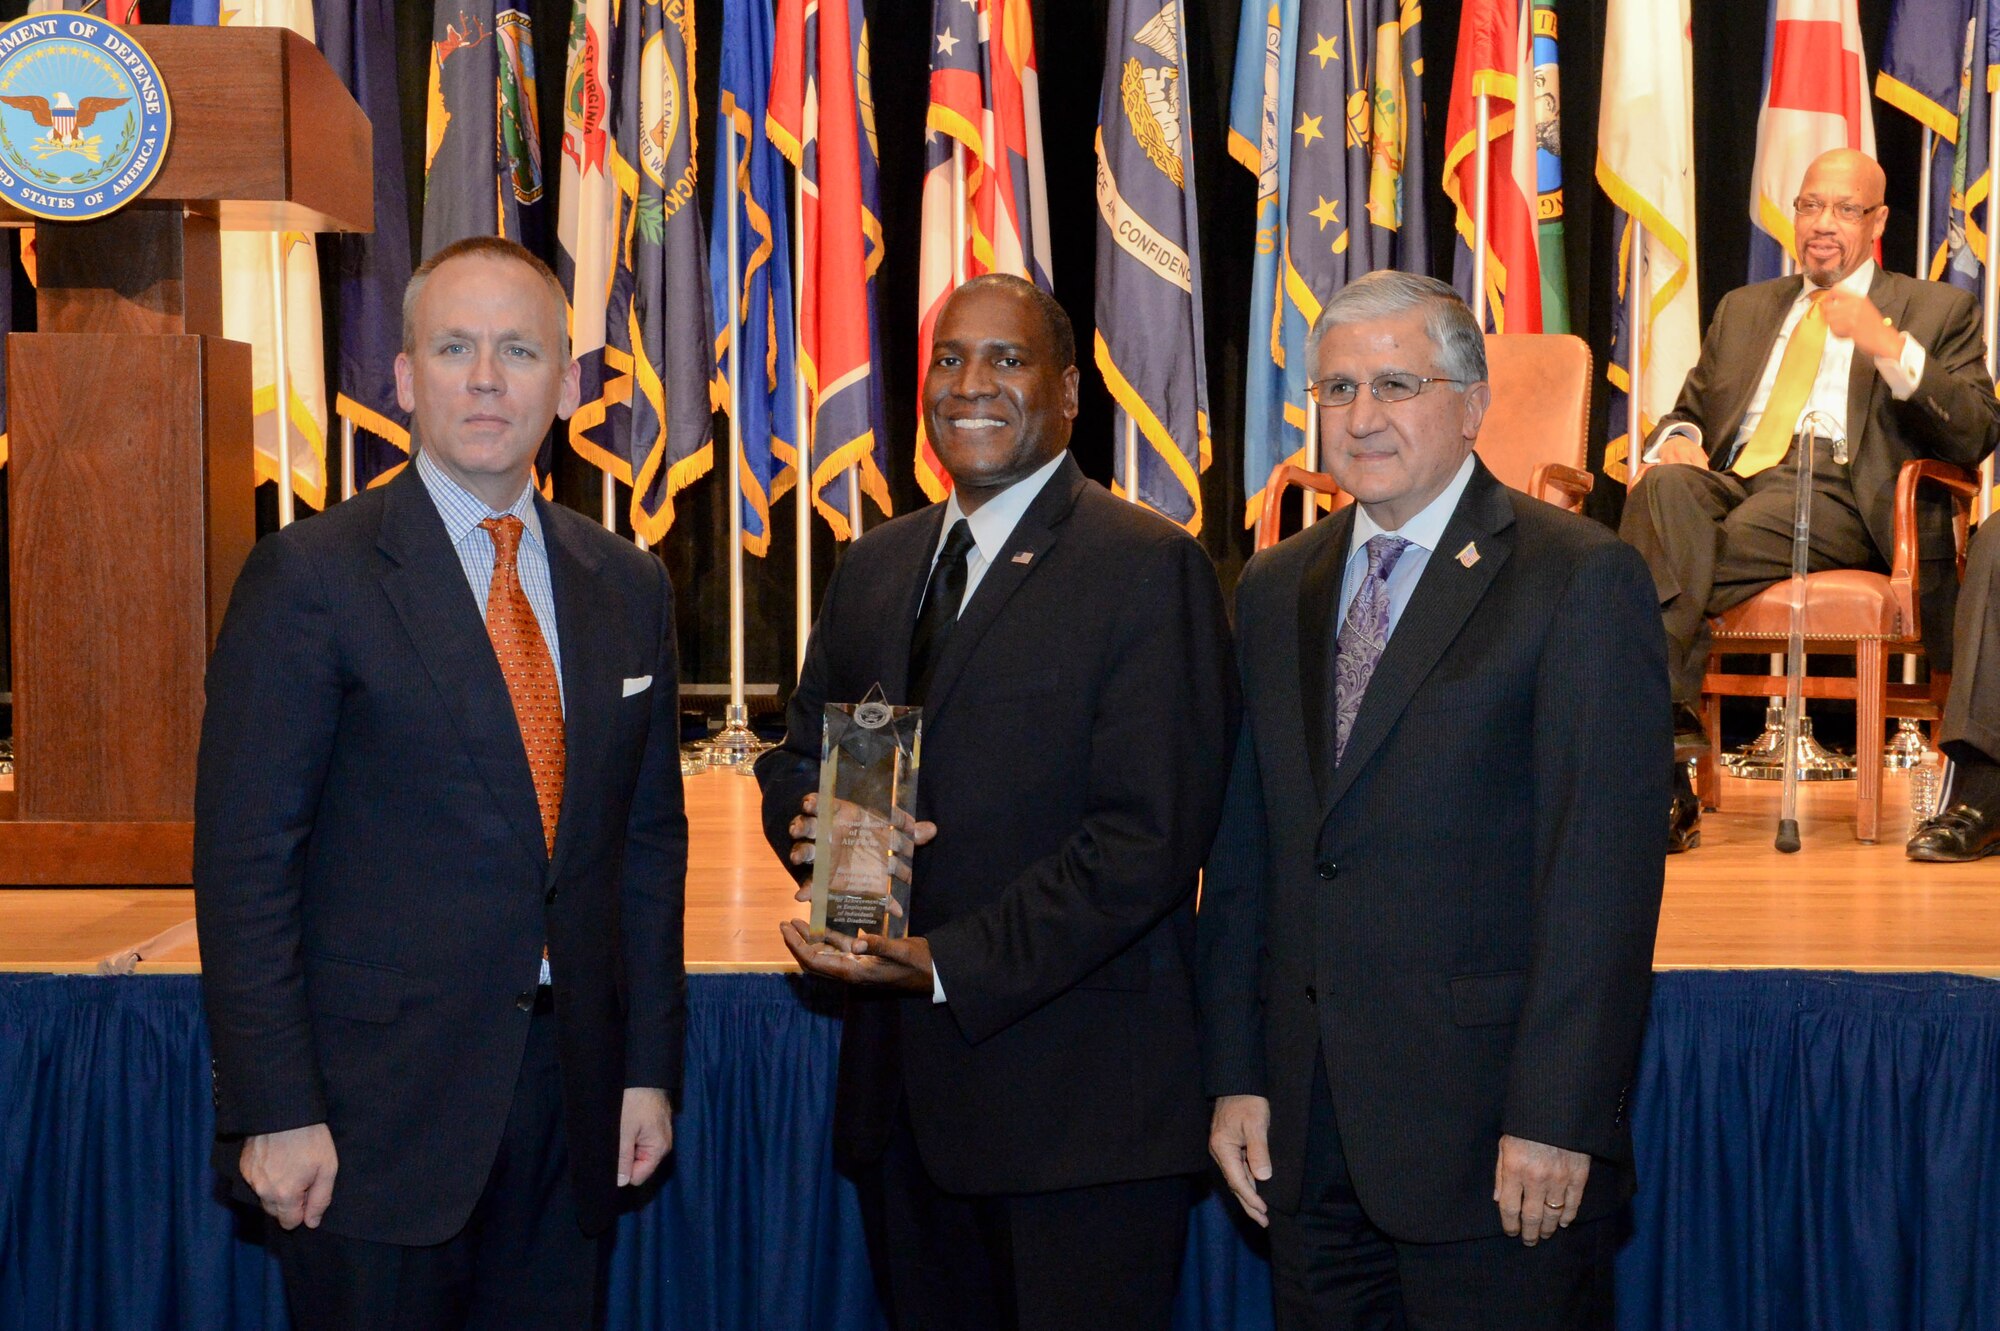 Brad Carson, the acting undersecretary of defense for personnel and readiness, presents the secretary of defense award for the best disability program among large military components to Bob Corsi, the assistant deputy chief of staff of manpower, personnel and services, and Dr. Jarris Taylor, deputy assistant secretary of strategic diversity integration, during a ceremony at the Pentagon Oct. 29, 2015. For the past 35 years, the Office of Diversity Management and Equal Opportunity has recognized outstanding service members and Defense Department civilian personnel with disabilities at an annual awards ceremony. (U.S. Army photo/Sgt. Courtney Russell)